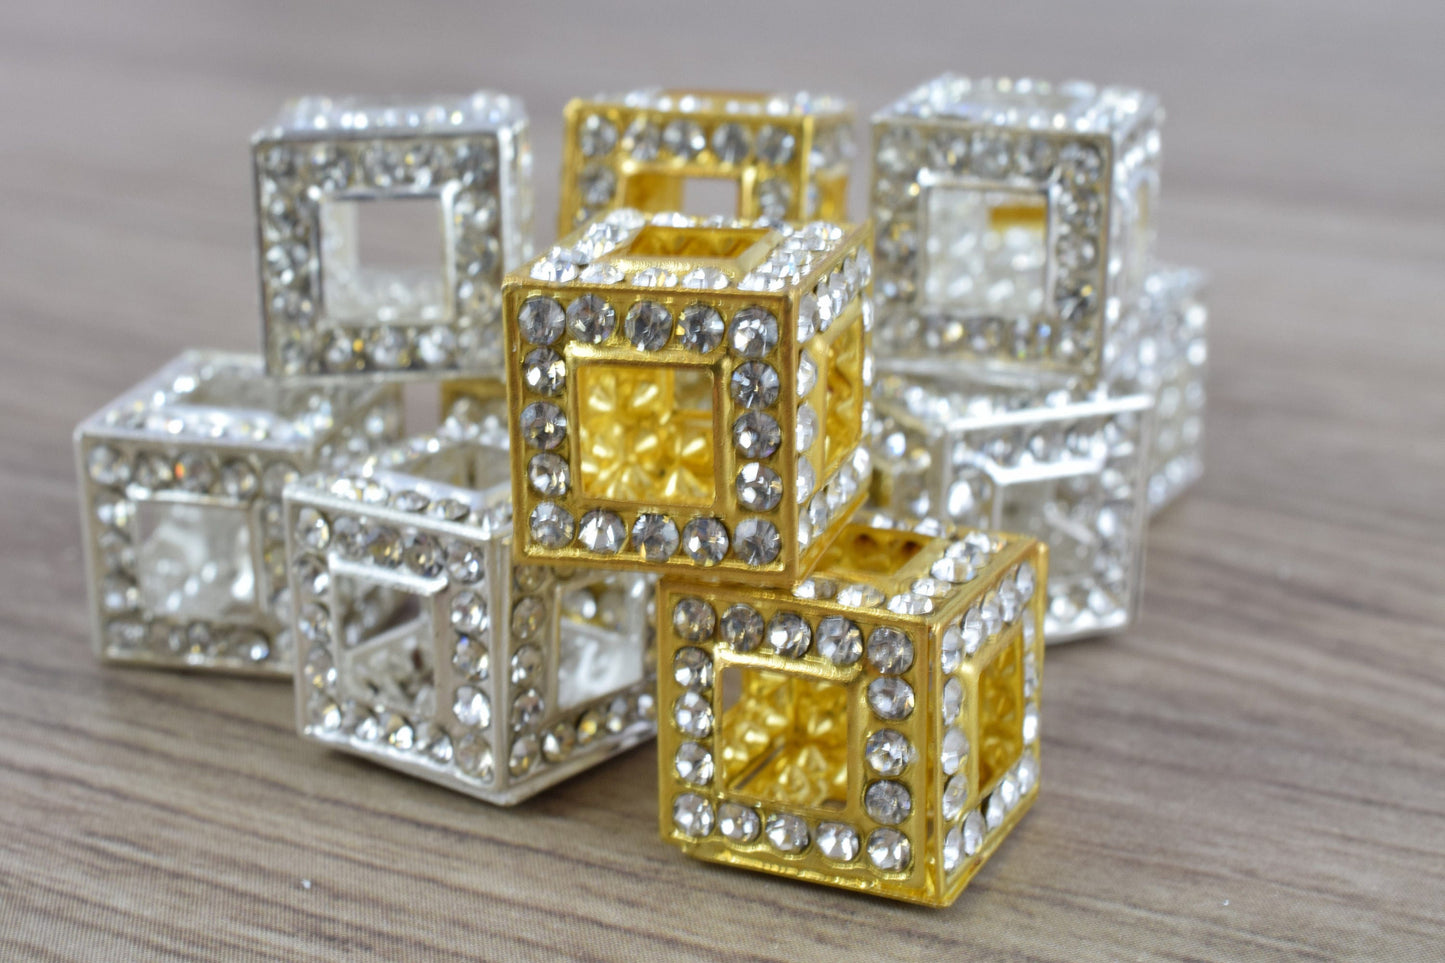 14mm Crystal Rhinestone Pave Big Hole Square Cube Spacer Beads,6 PCs for Jewelry Making, Craft Supplies, Tools,Findings, Crystal,Rhinestones